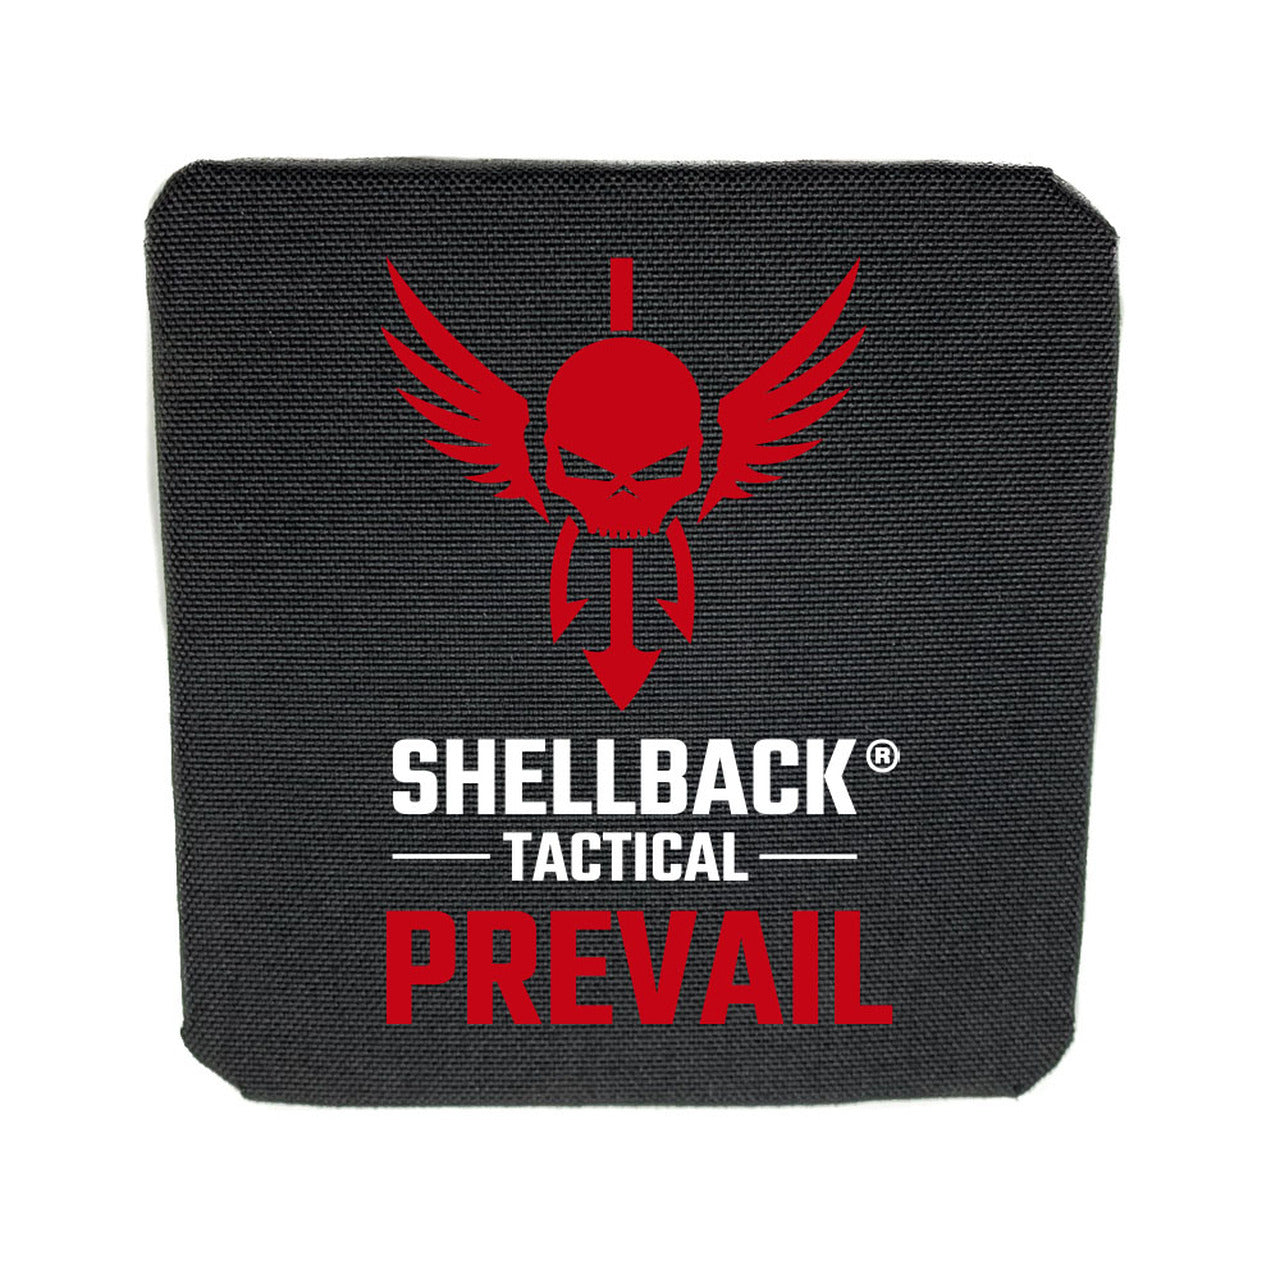 Shellback Tactical - Shellback Tactical Prevail Series Level IV Single Curve 6 x 6 Hard Armor Plate - Model 4S17.